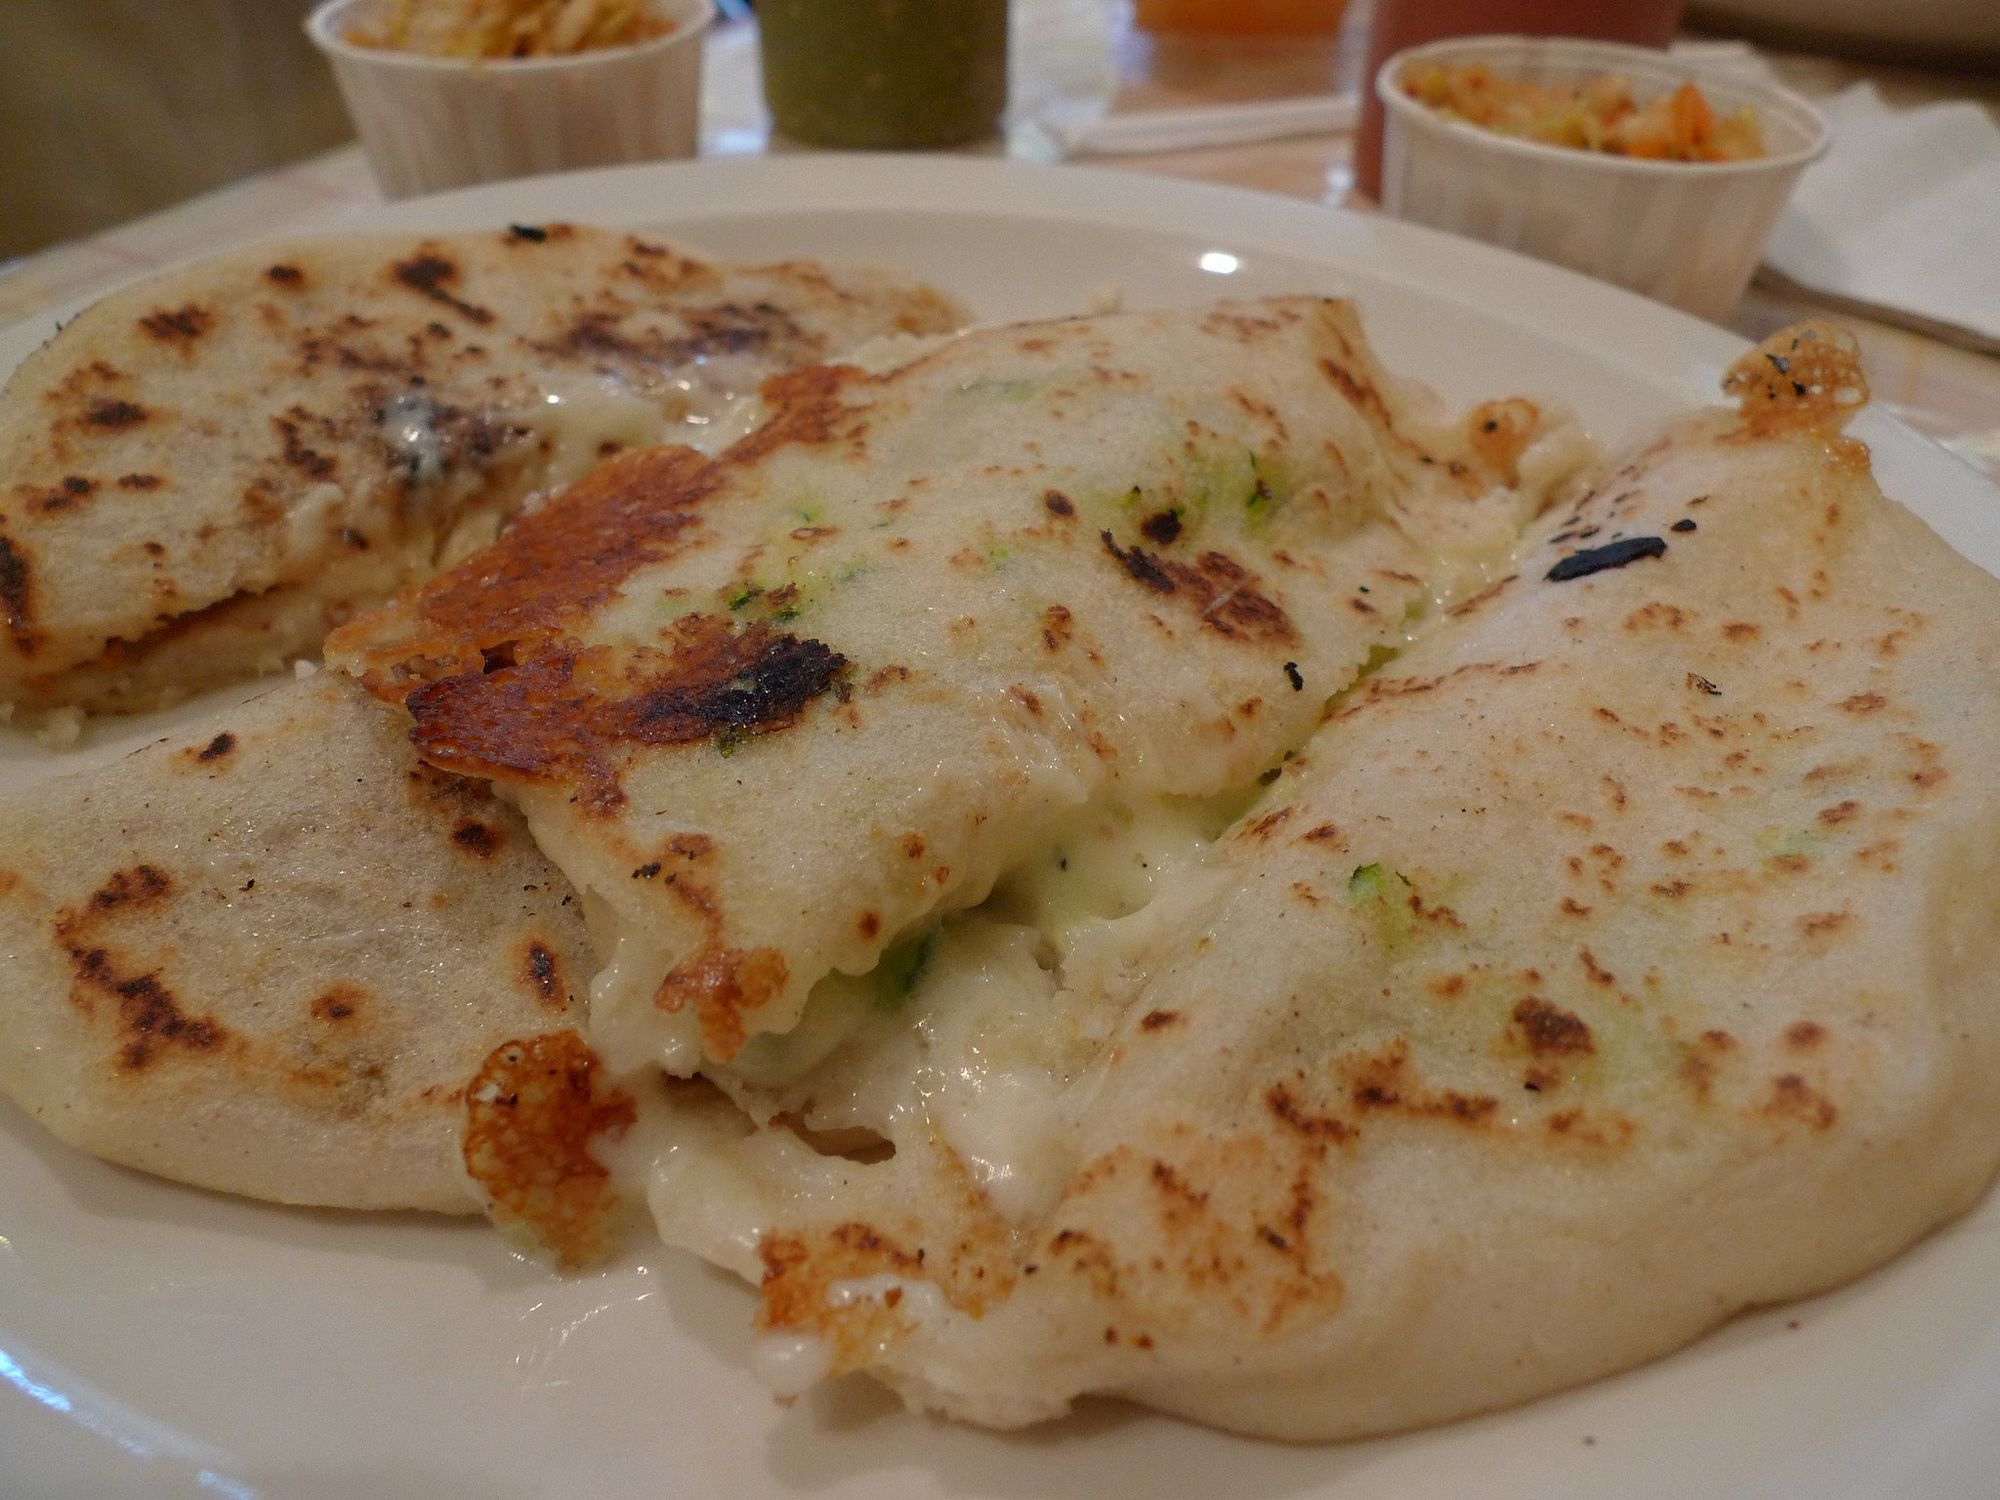 Pupusas filled with pork and cheese and squash and cheese.